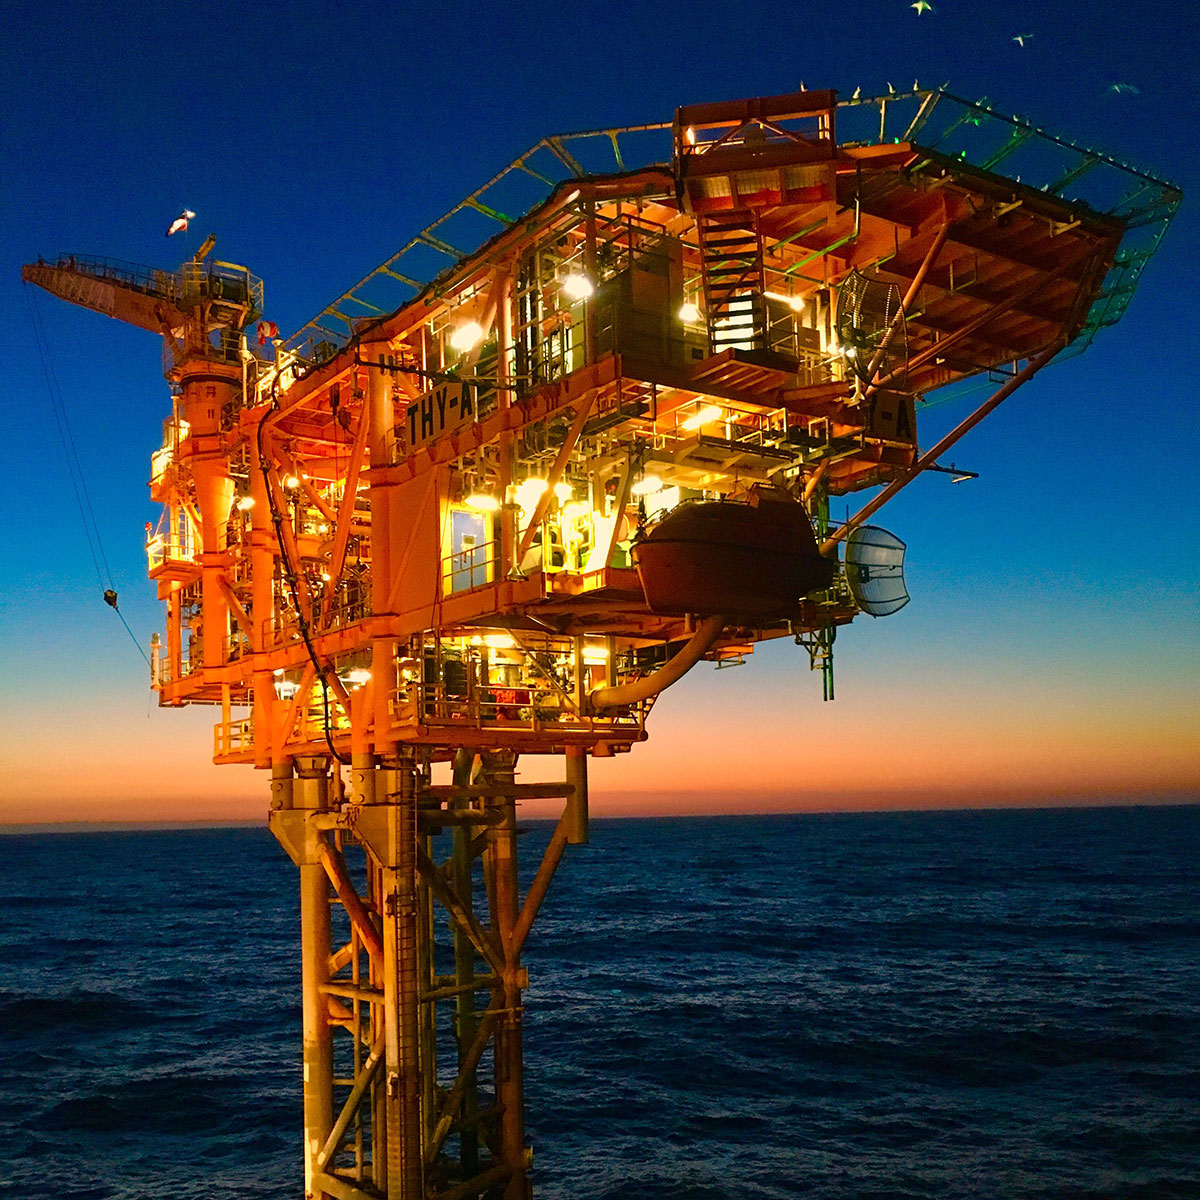 Image of Thylacine-offshore platform, Otway, in the early morning with calm sea and magnificent crimson sunrise in background